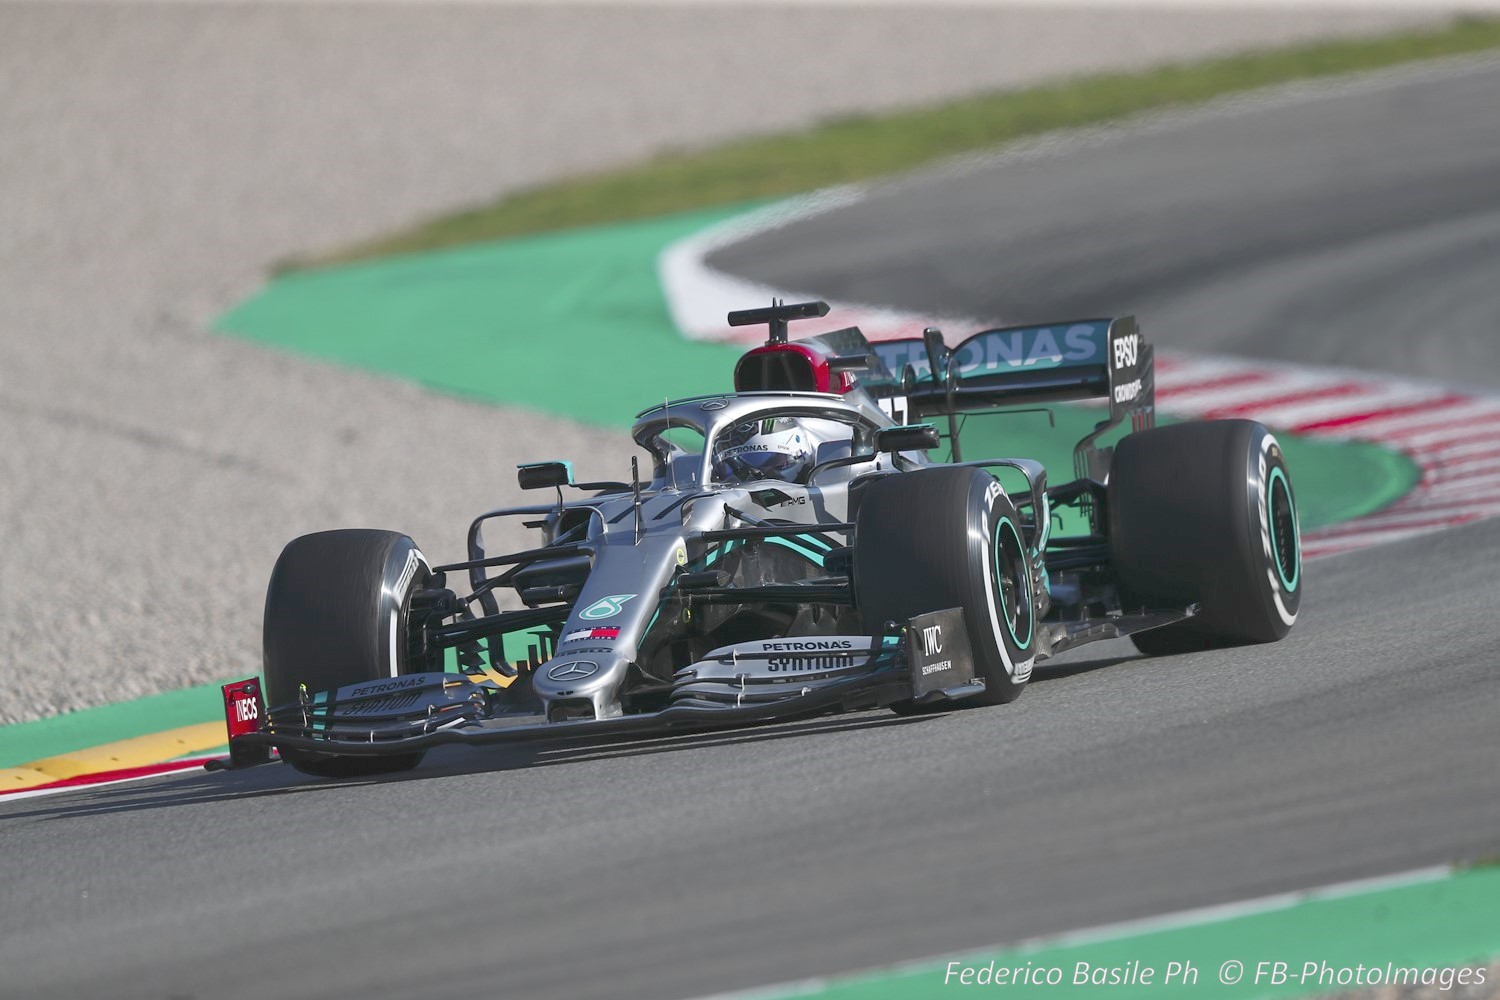 Valtteri Bottas would love to race the illegal DAS.  DAS changes the suspension setting of a car while in motion, hence illegal. Mercedes argues that 'toe' is a steering setting, which is complete BS because the rear tire toe setting can be adjusted by the mechanics, so the argument 'toe' is not a suspension setting (the rear wheels do not steer) is pretty weak.